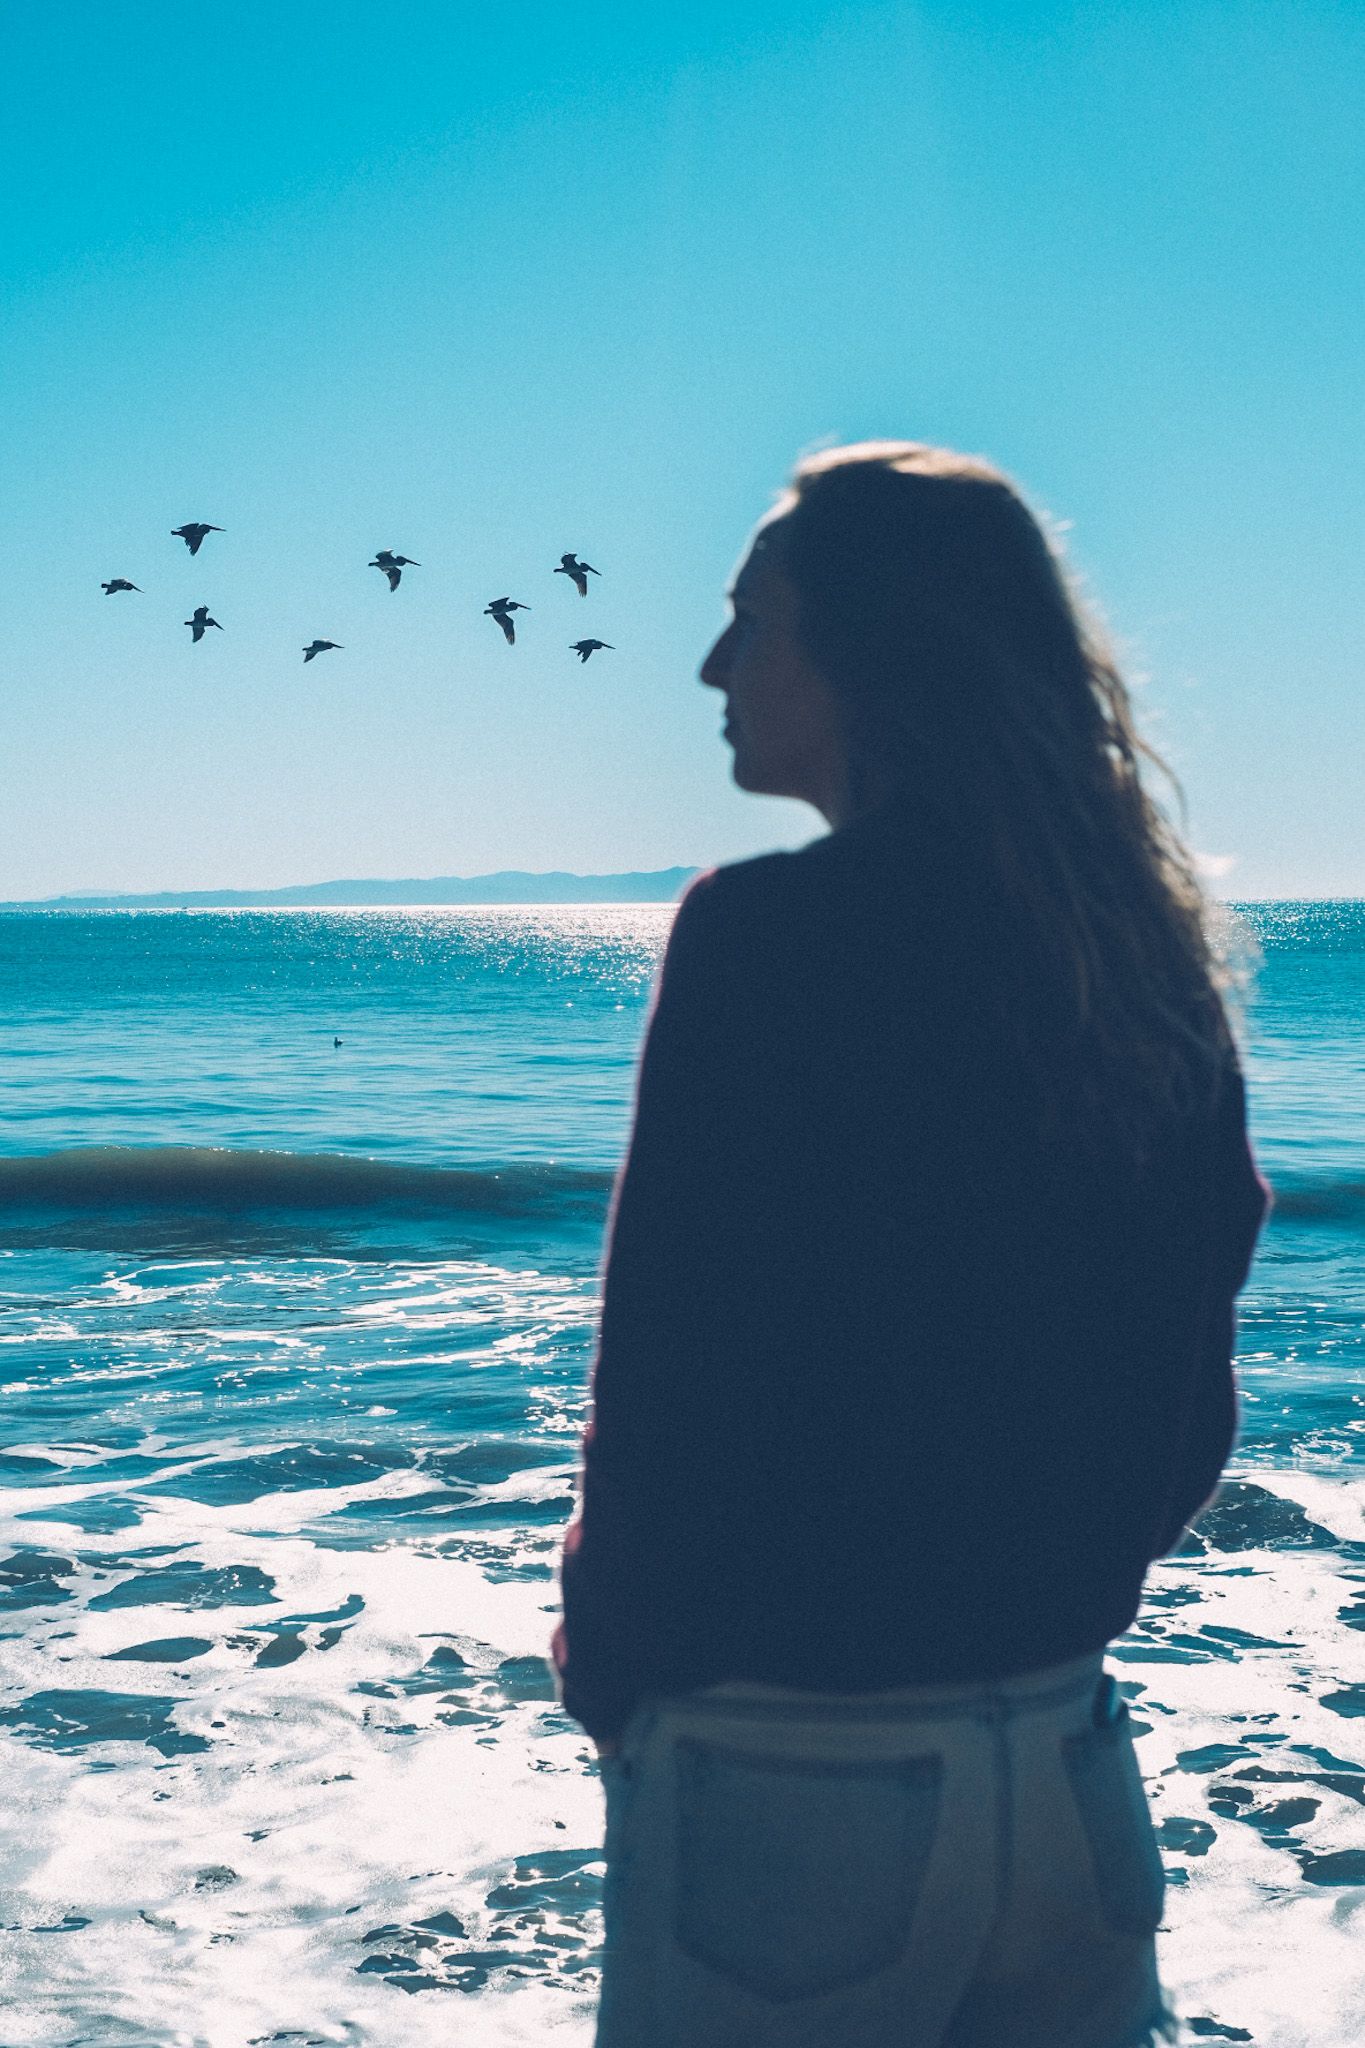 A woman with long flowing hair looks to the left of the photo as a flock of birds align with her eyesight, over the blue sea.